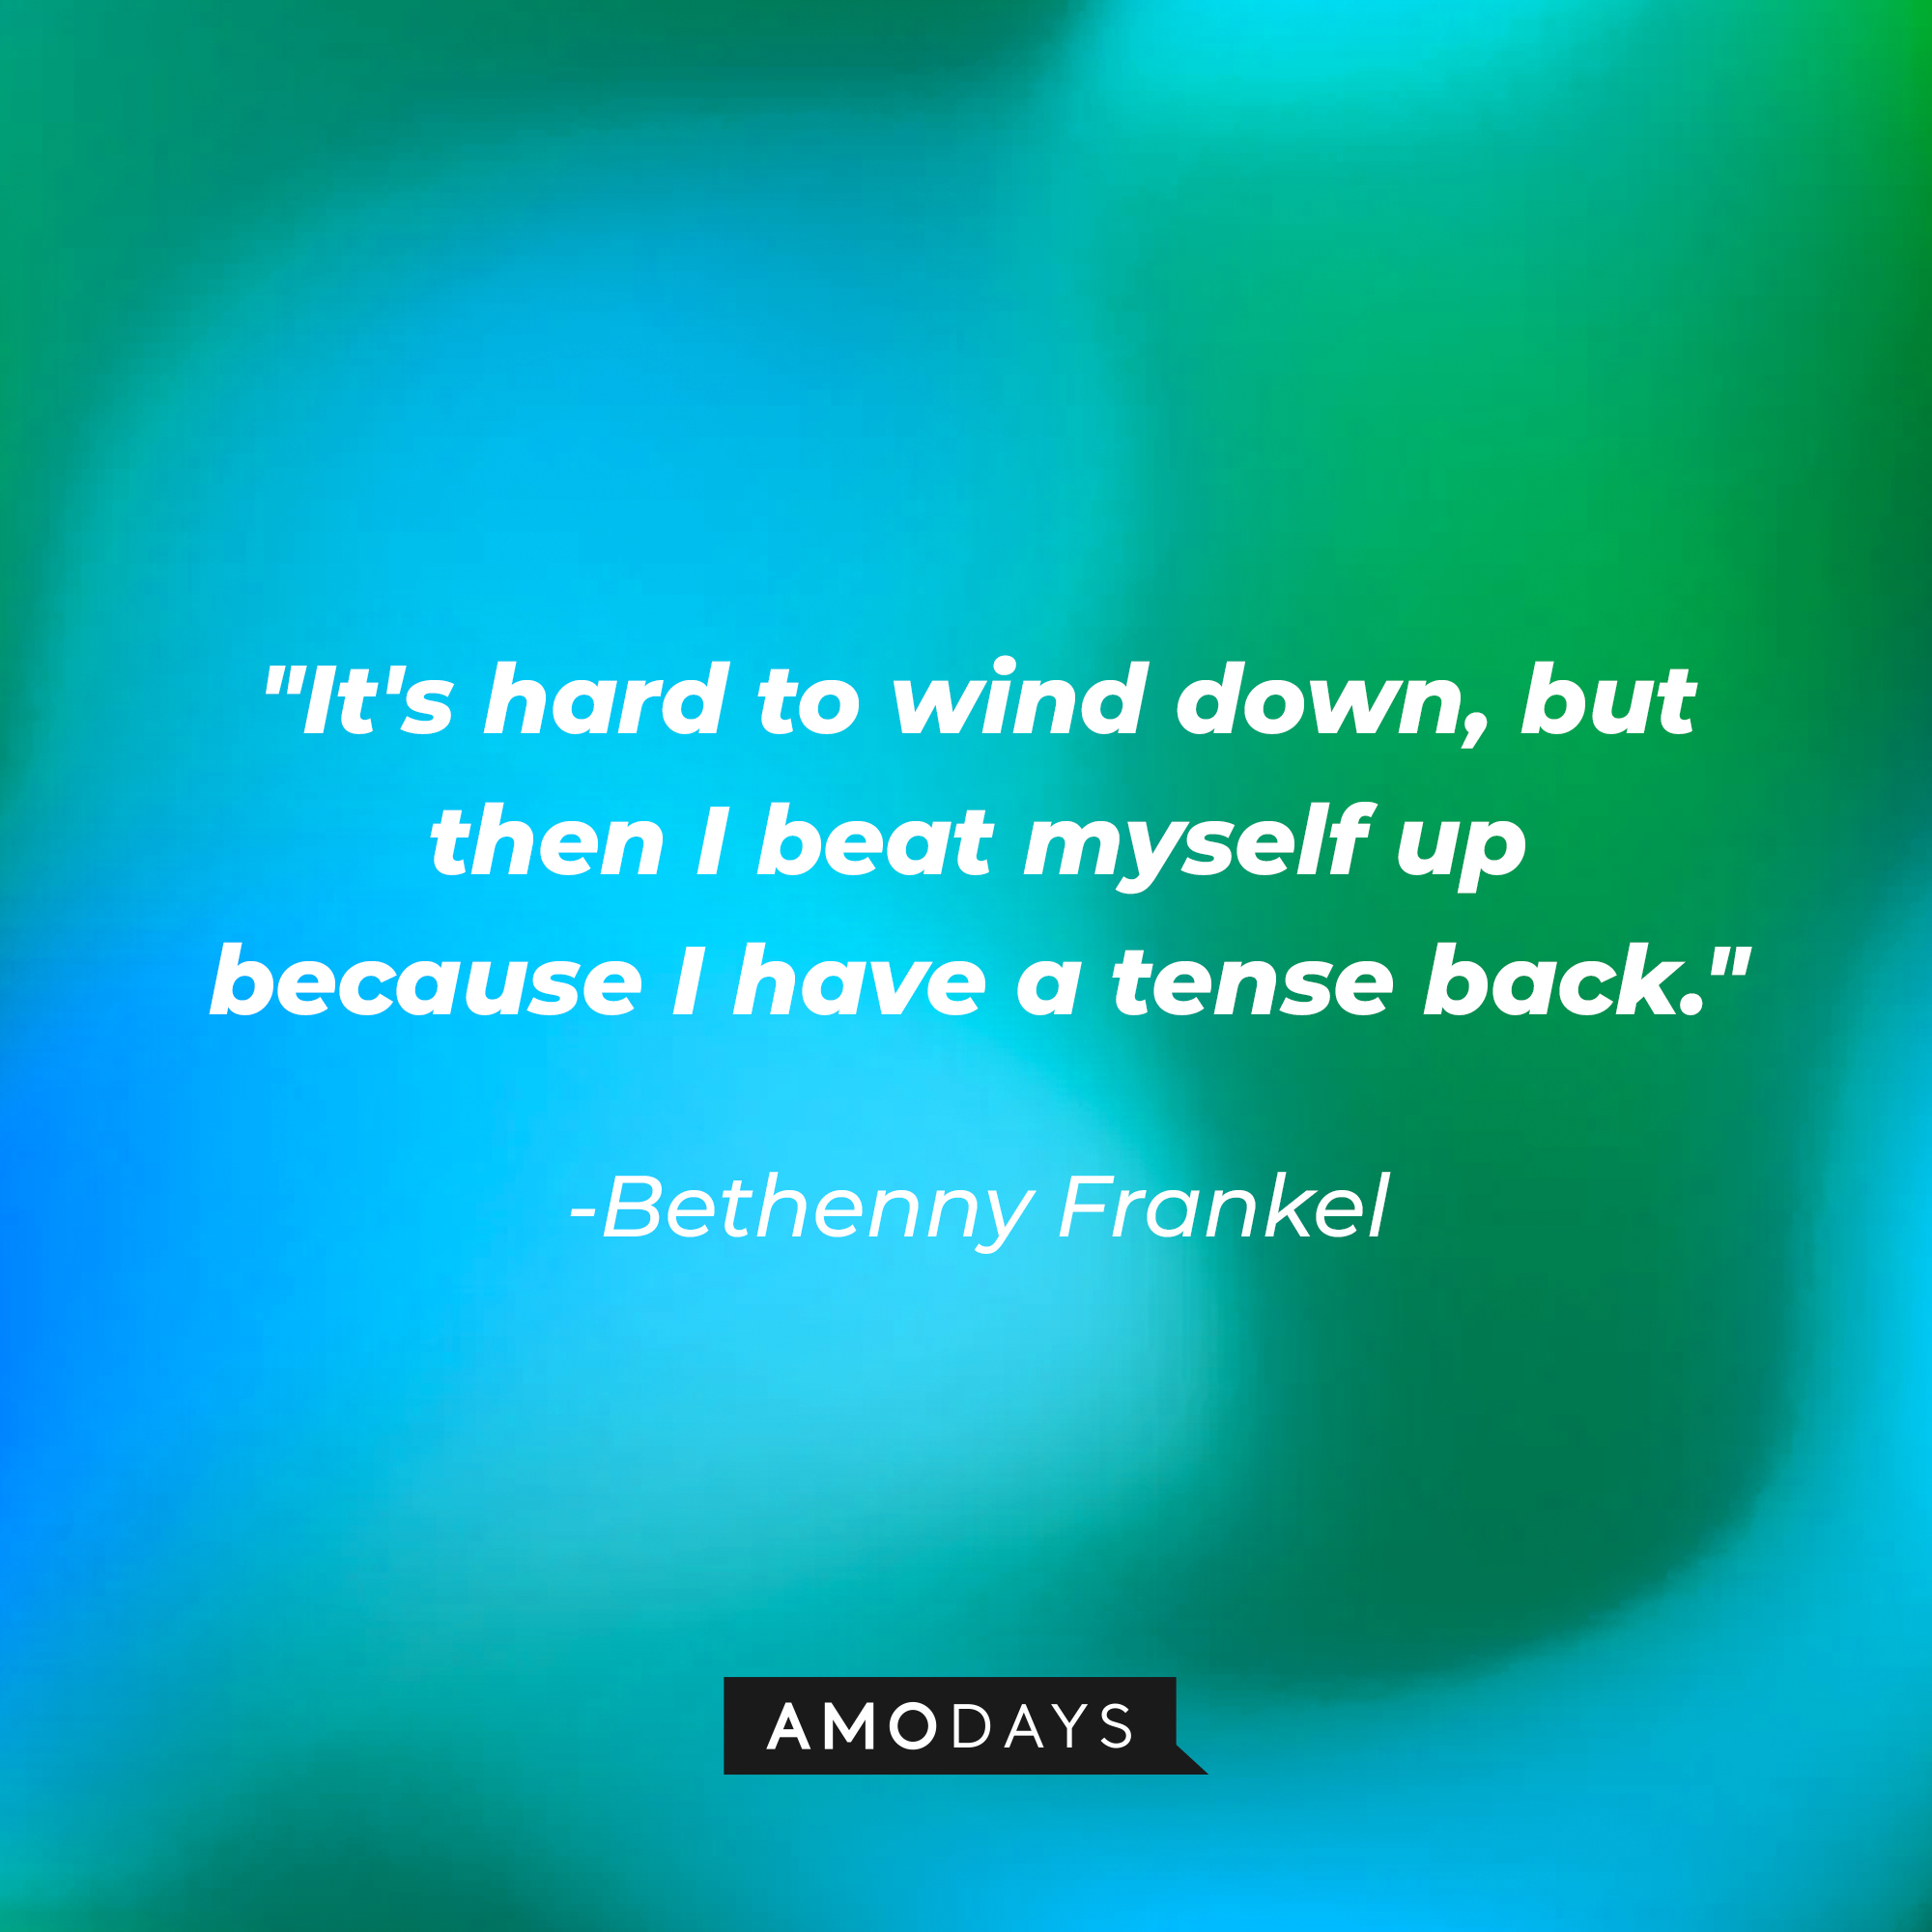 Bethenny Frankel's quote: "It's hard to wind down, but then I beat myself up because I have a tense back." | Source: Amodays